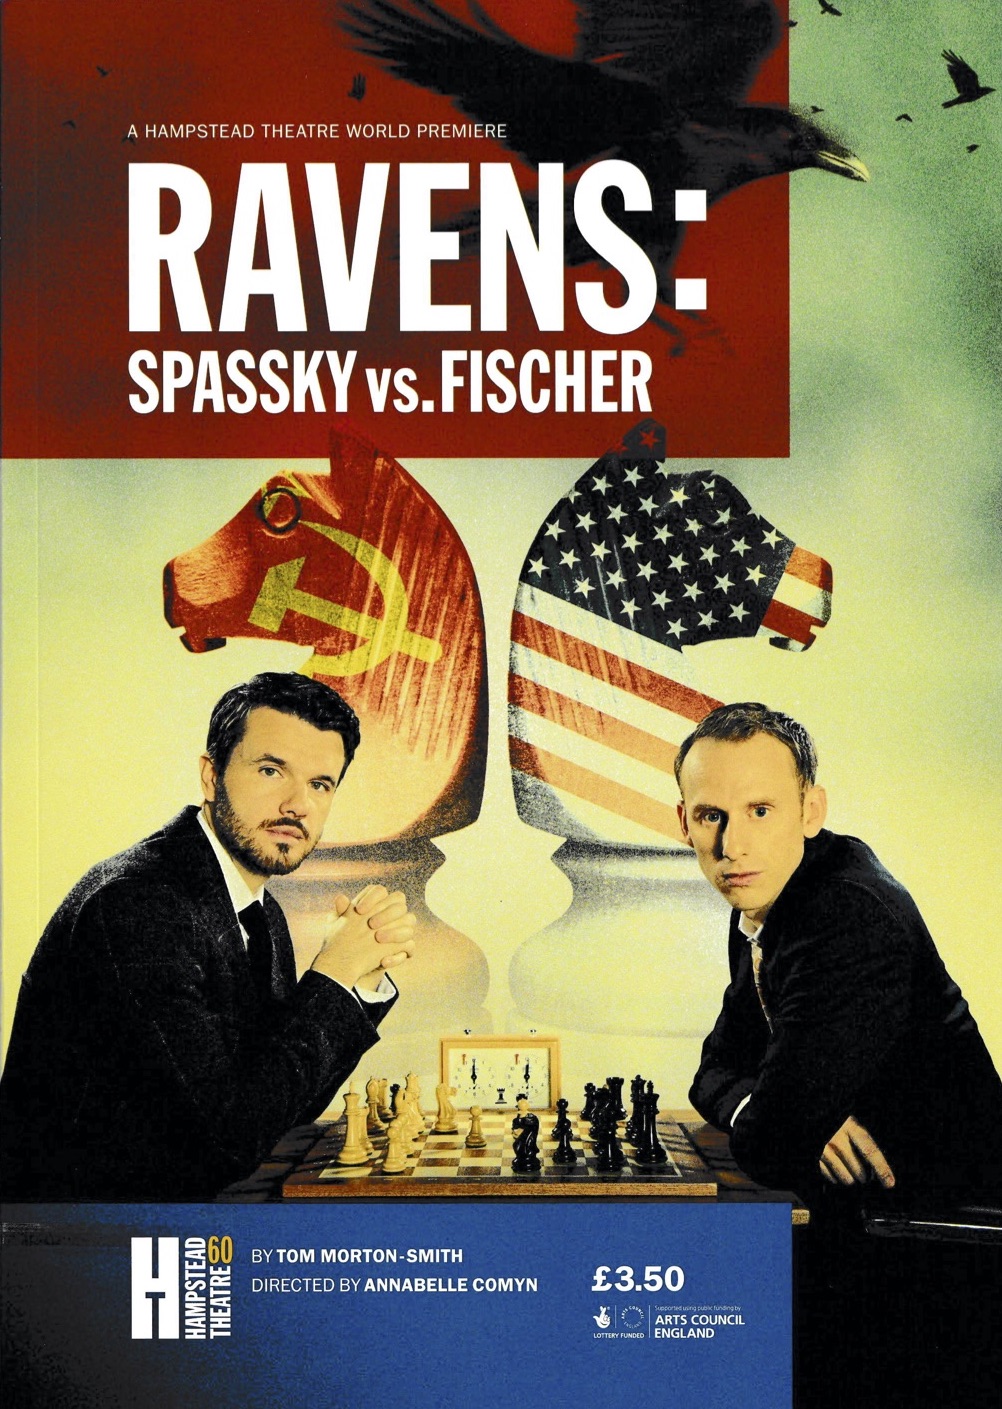 Véronique Chemla on X: Ravens: Spassky Vs. Fischer thriller by Tom  Morton-Smit @Hamps_Theatre, directed by Annabelle Comyn, cast: Ronan  Raftery & Robert Emms.Reykjavik, 1972. The Match of the Century: Boris  Spassky vs.